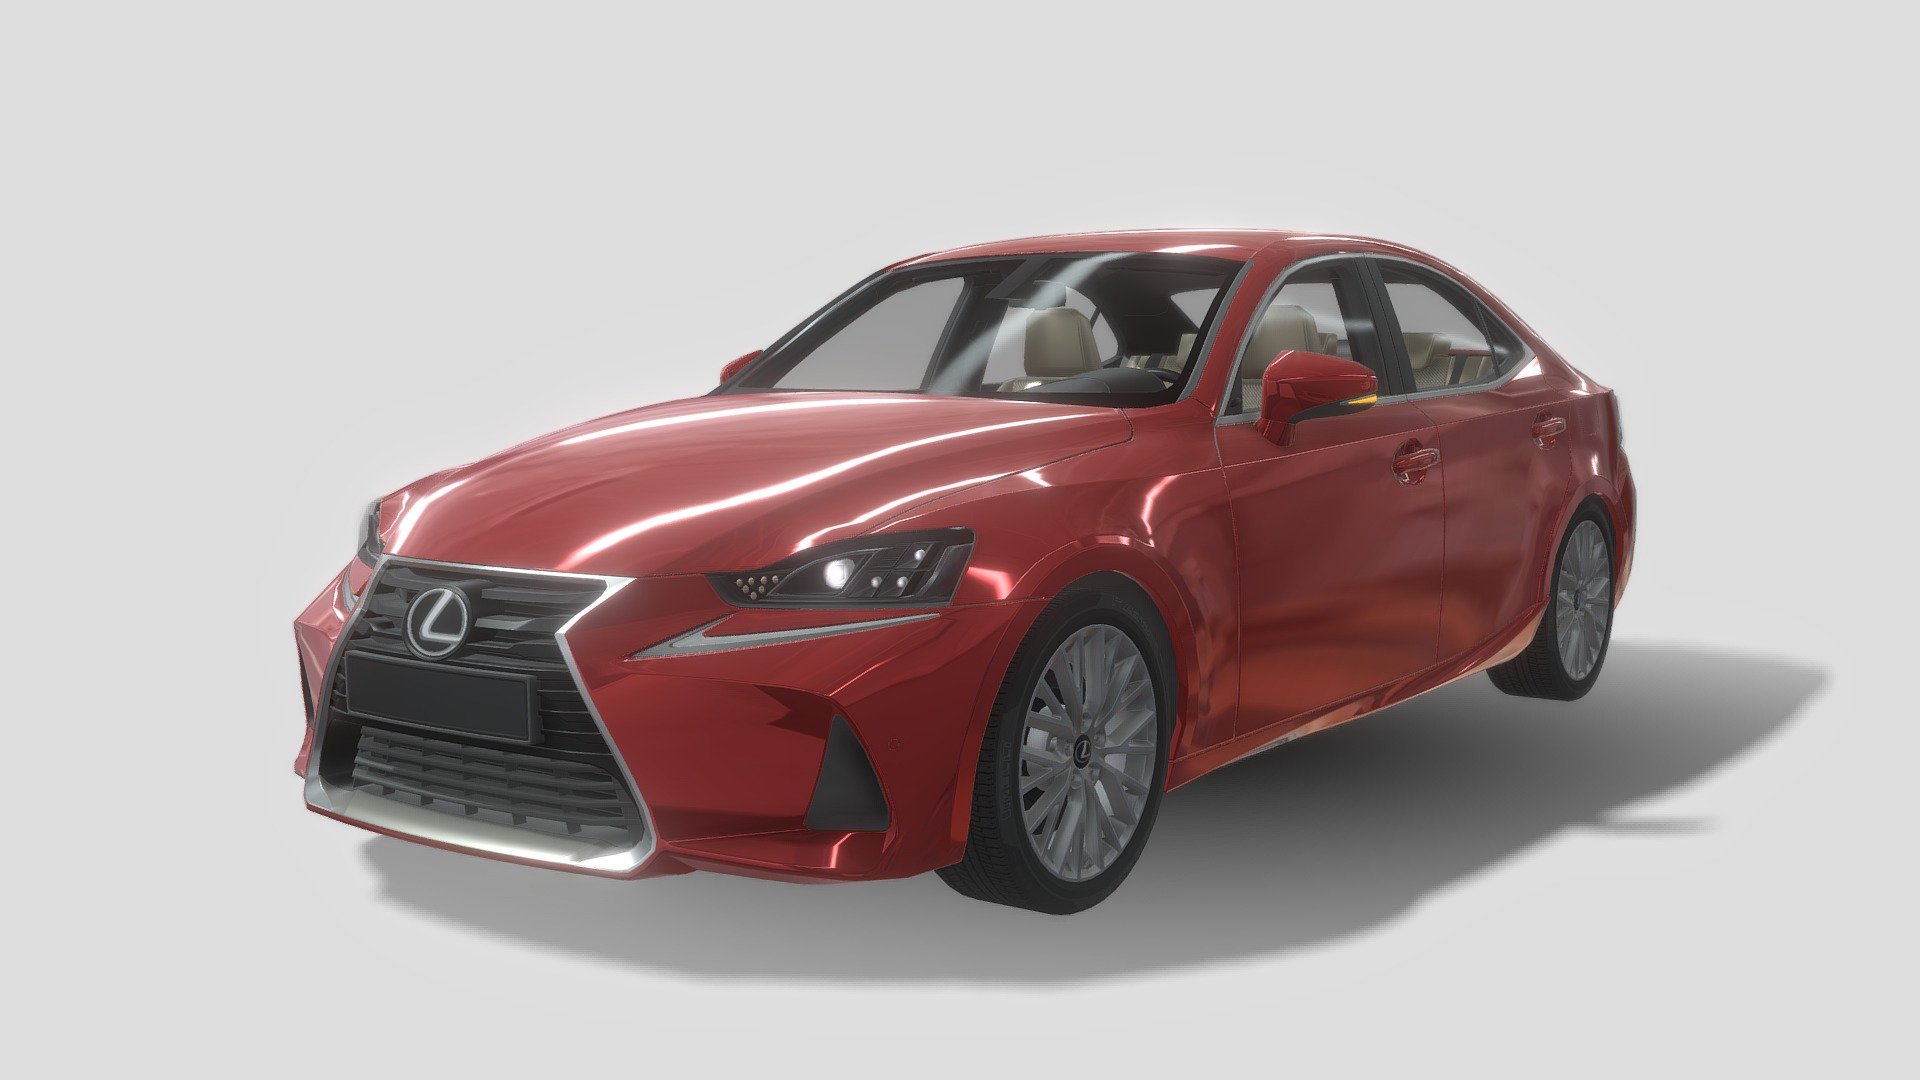 Lexus Luxurycar Model,highpoly &amp; HQ Interior mesh.
Software: 3DMax.
This model has a realistic interior (with a seperate steering-wheel), seperate wheels (hinged at geometry centre), seperated calipers and high-res textures. Overall, it’s a great model for use on mobile applications/games and in XR (AR/VR) environments.
 - Lexus Luxurycar Model - 3D model by sanfree 3d model